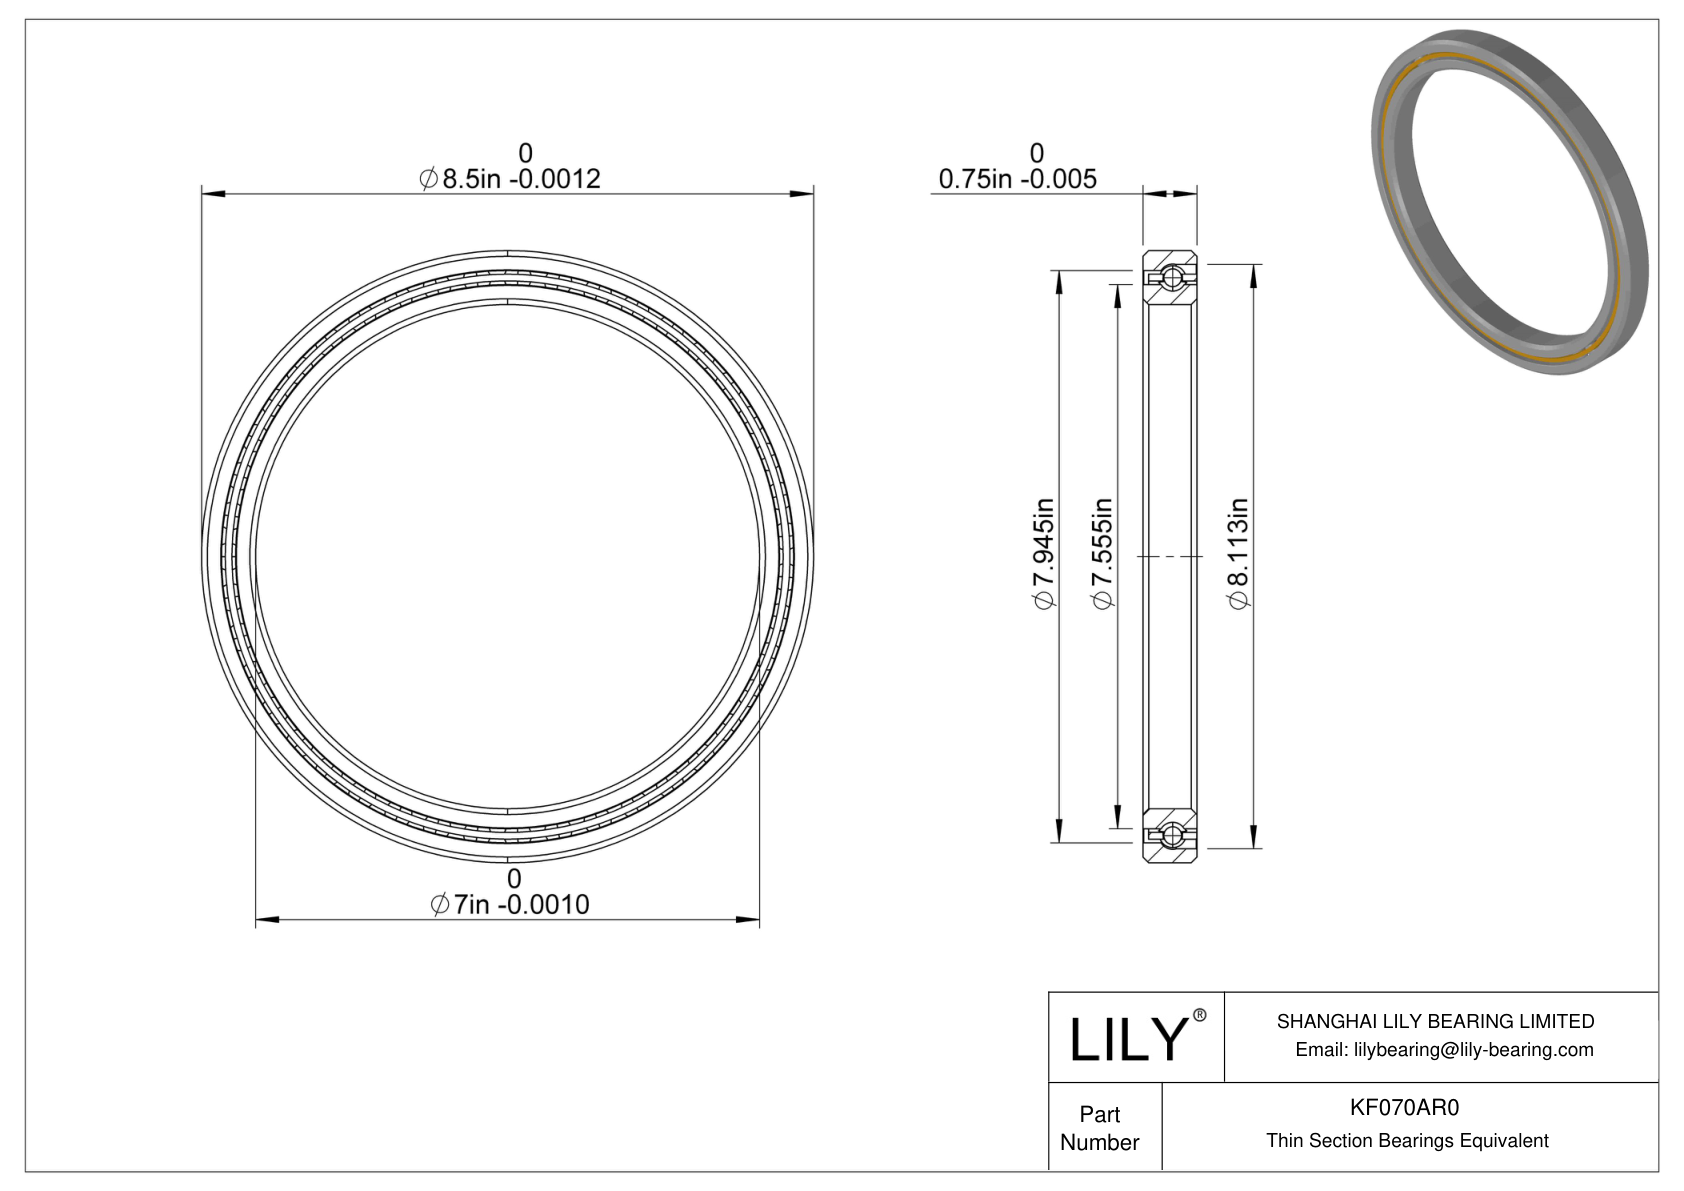 KF070AR0 Constant Section (CS) Bearings cad drawing